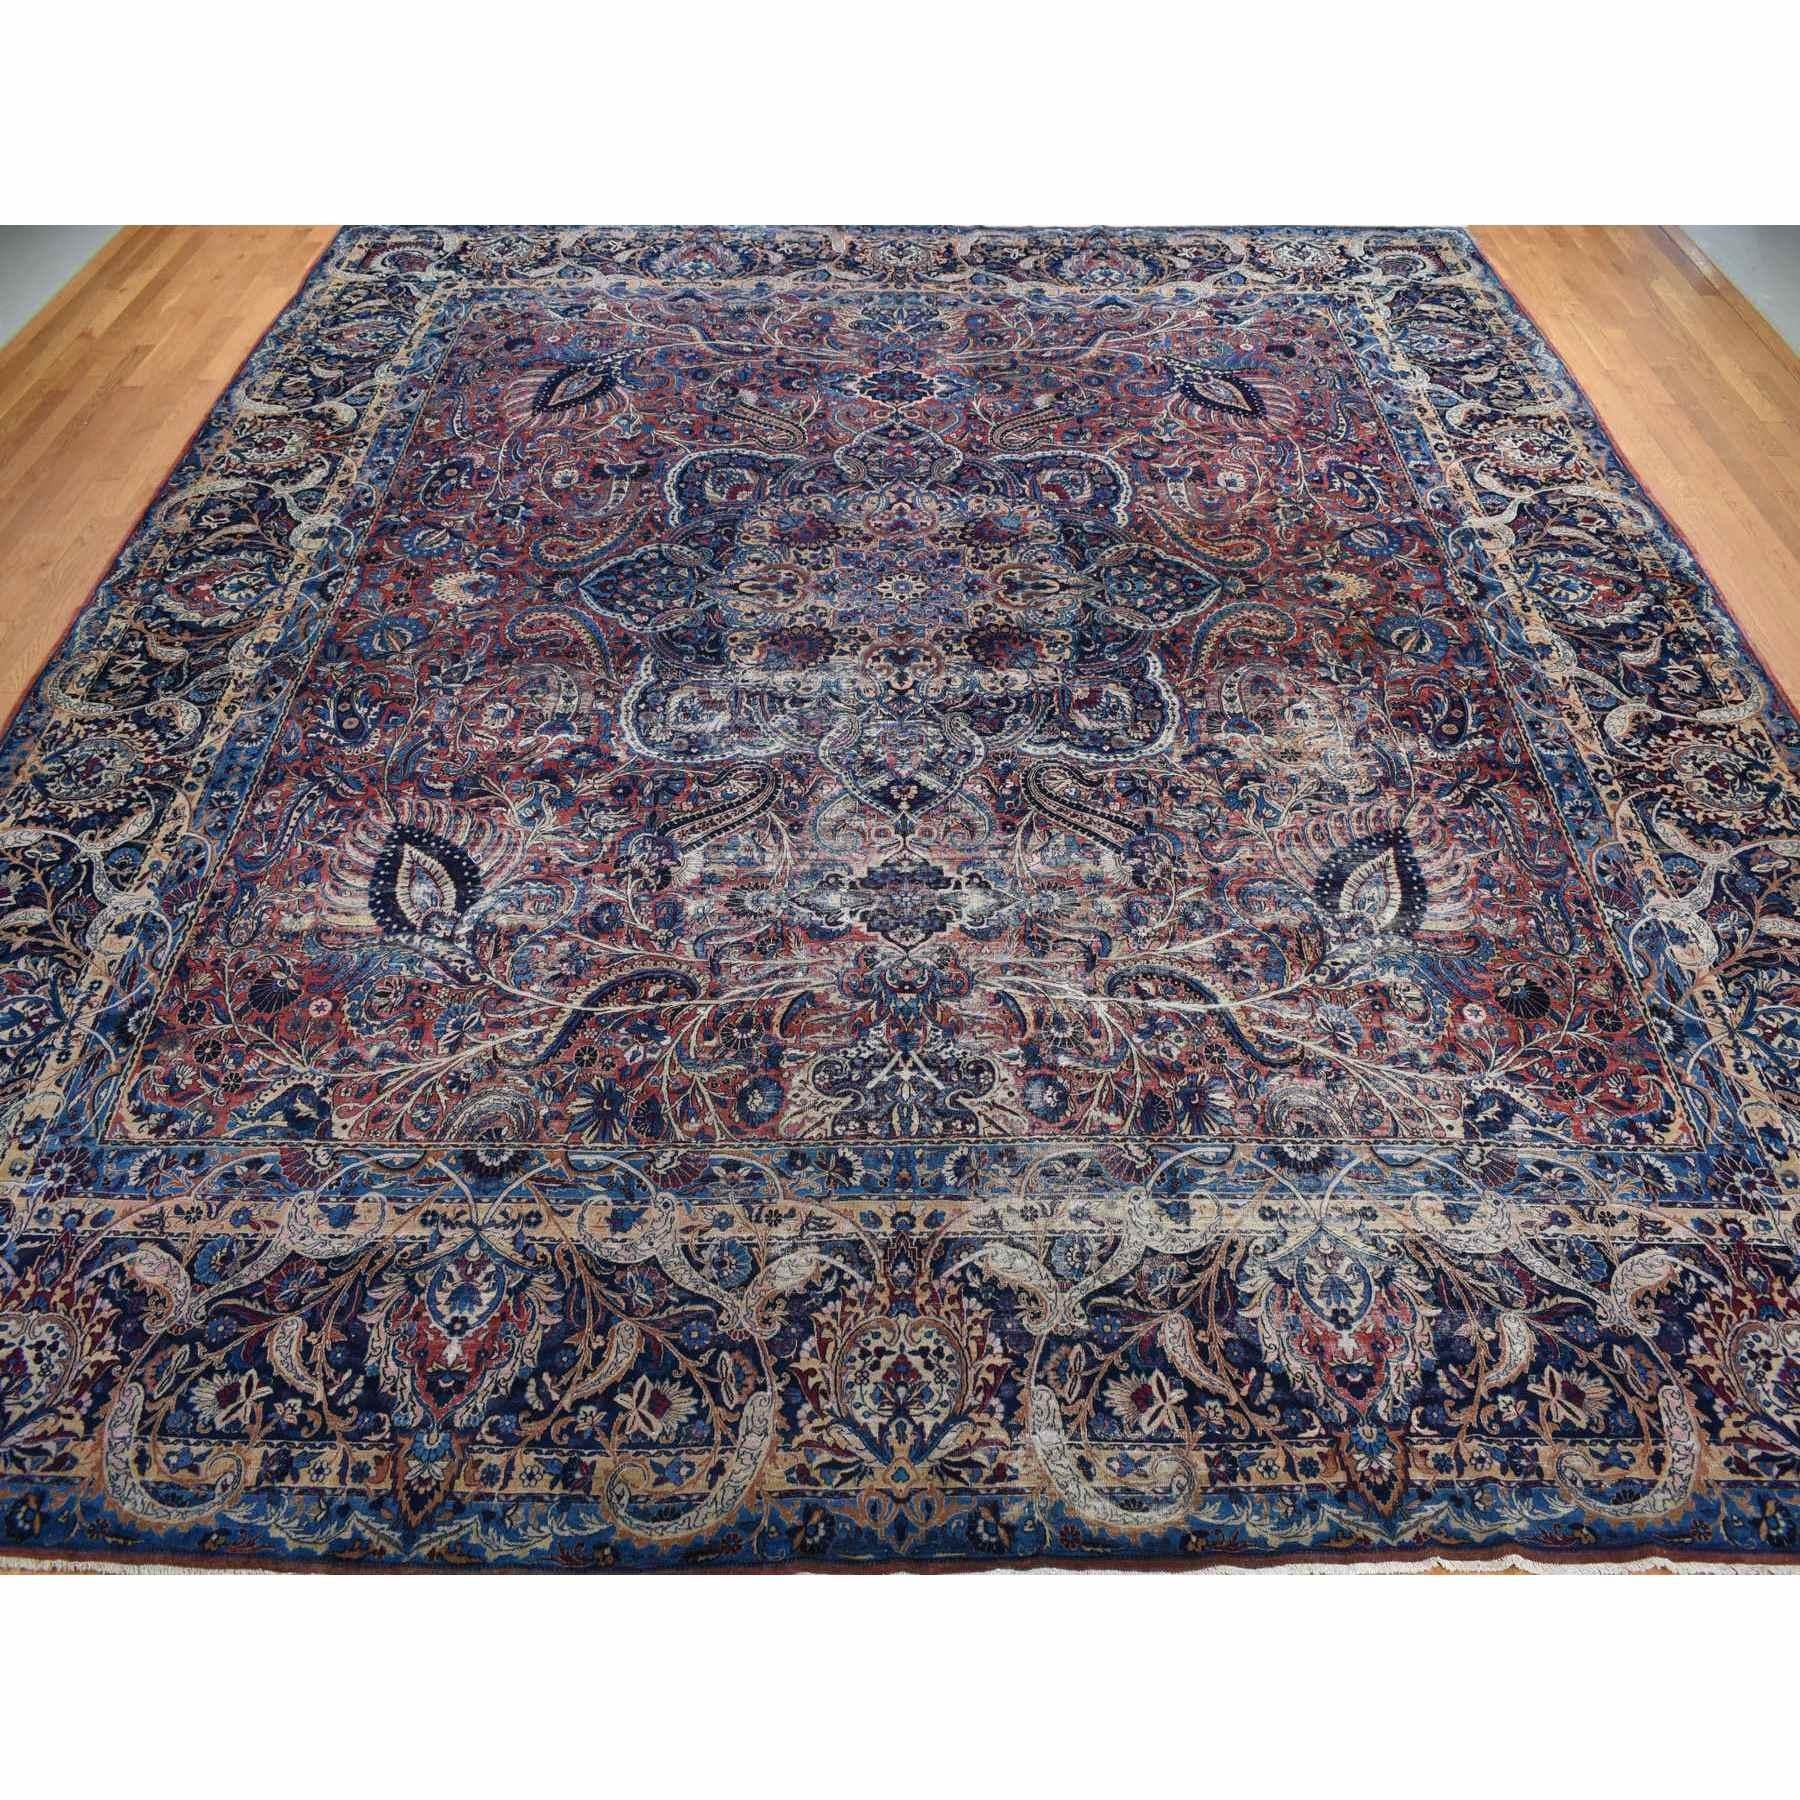 Medieval Imperial Blue Antique Persian Kerman Wool Hand Knotted Squarish Rug 14'6